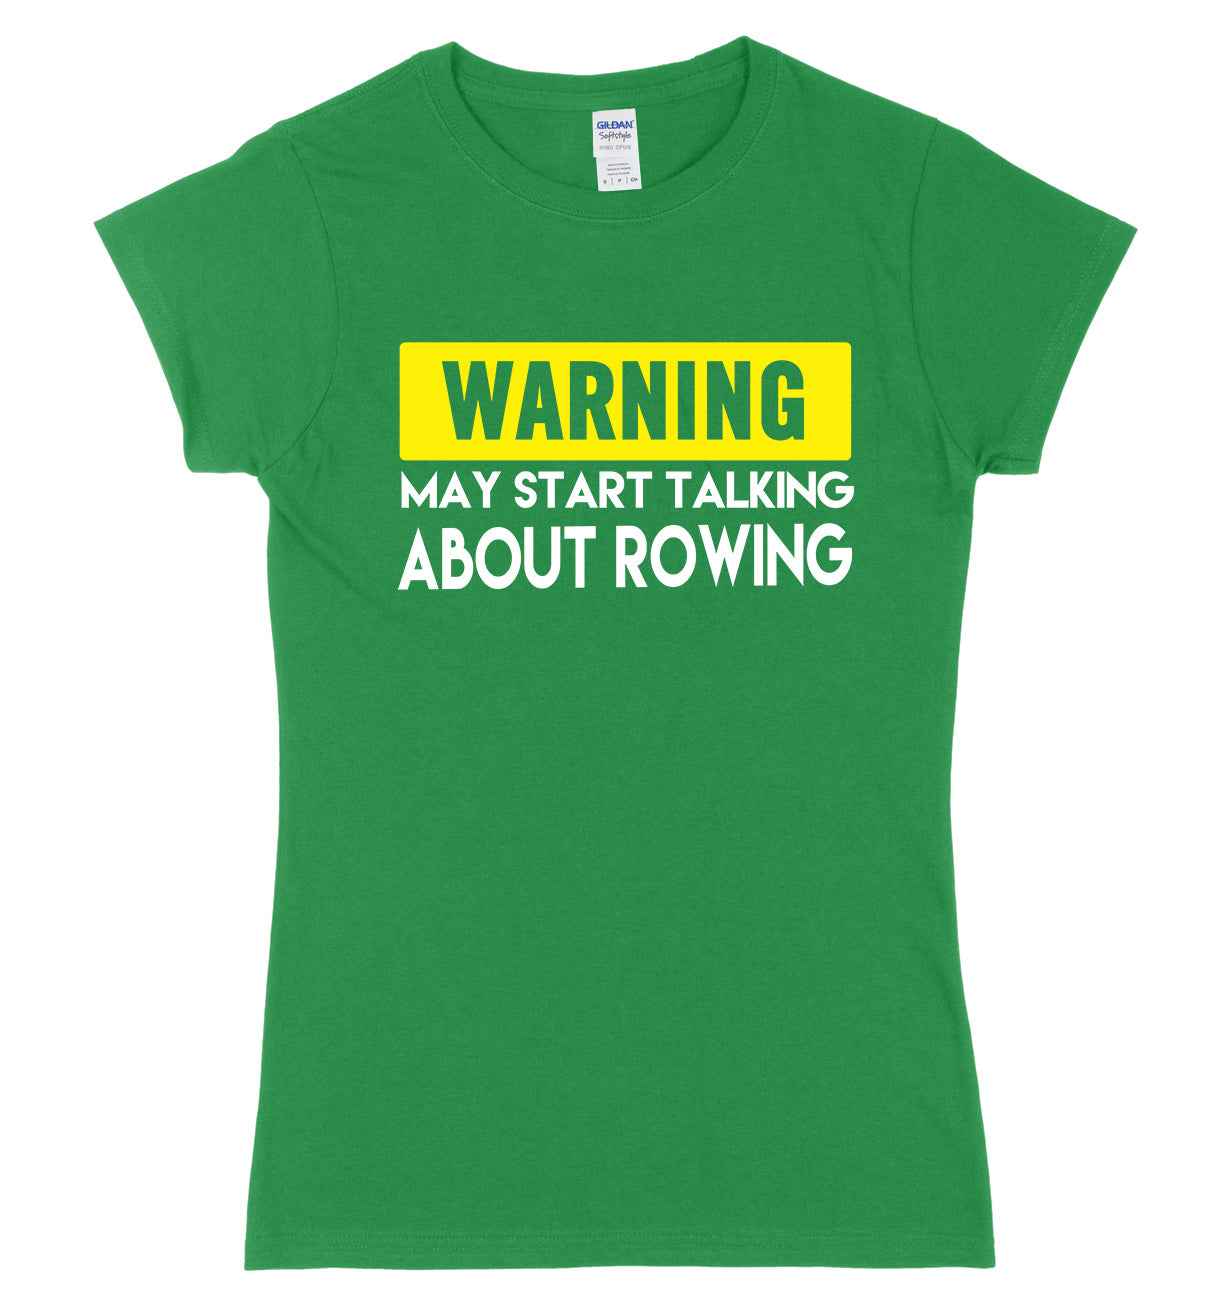 WARNING MAY START TALKING ABOUT ROWING FUNNY WOMENS LADIES SLIM FIT  T-SHIRT